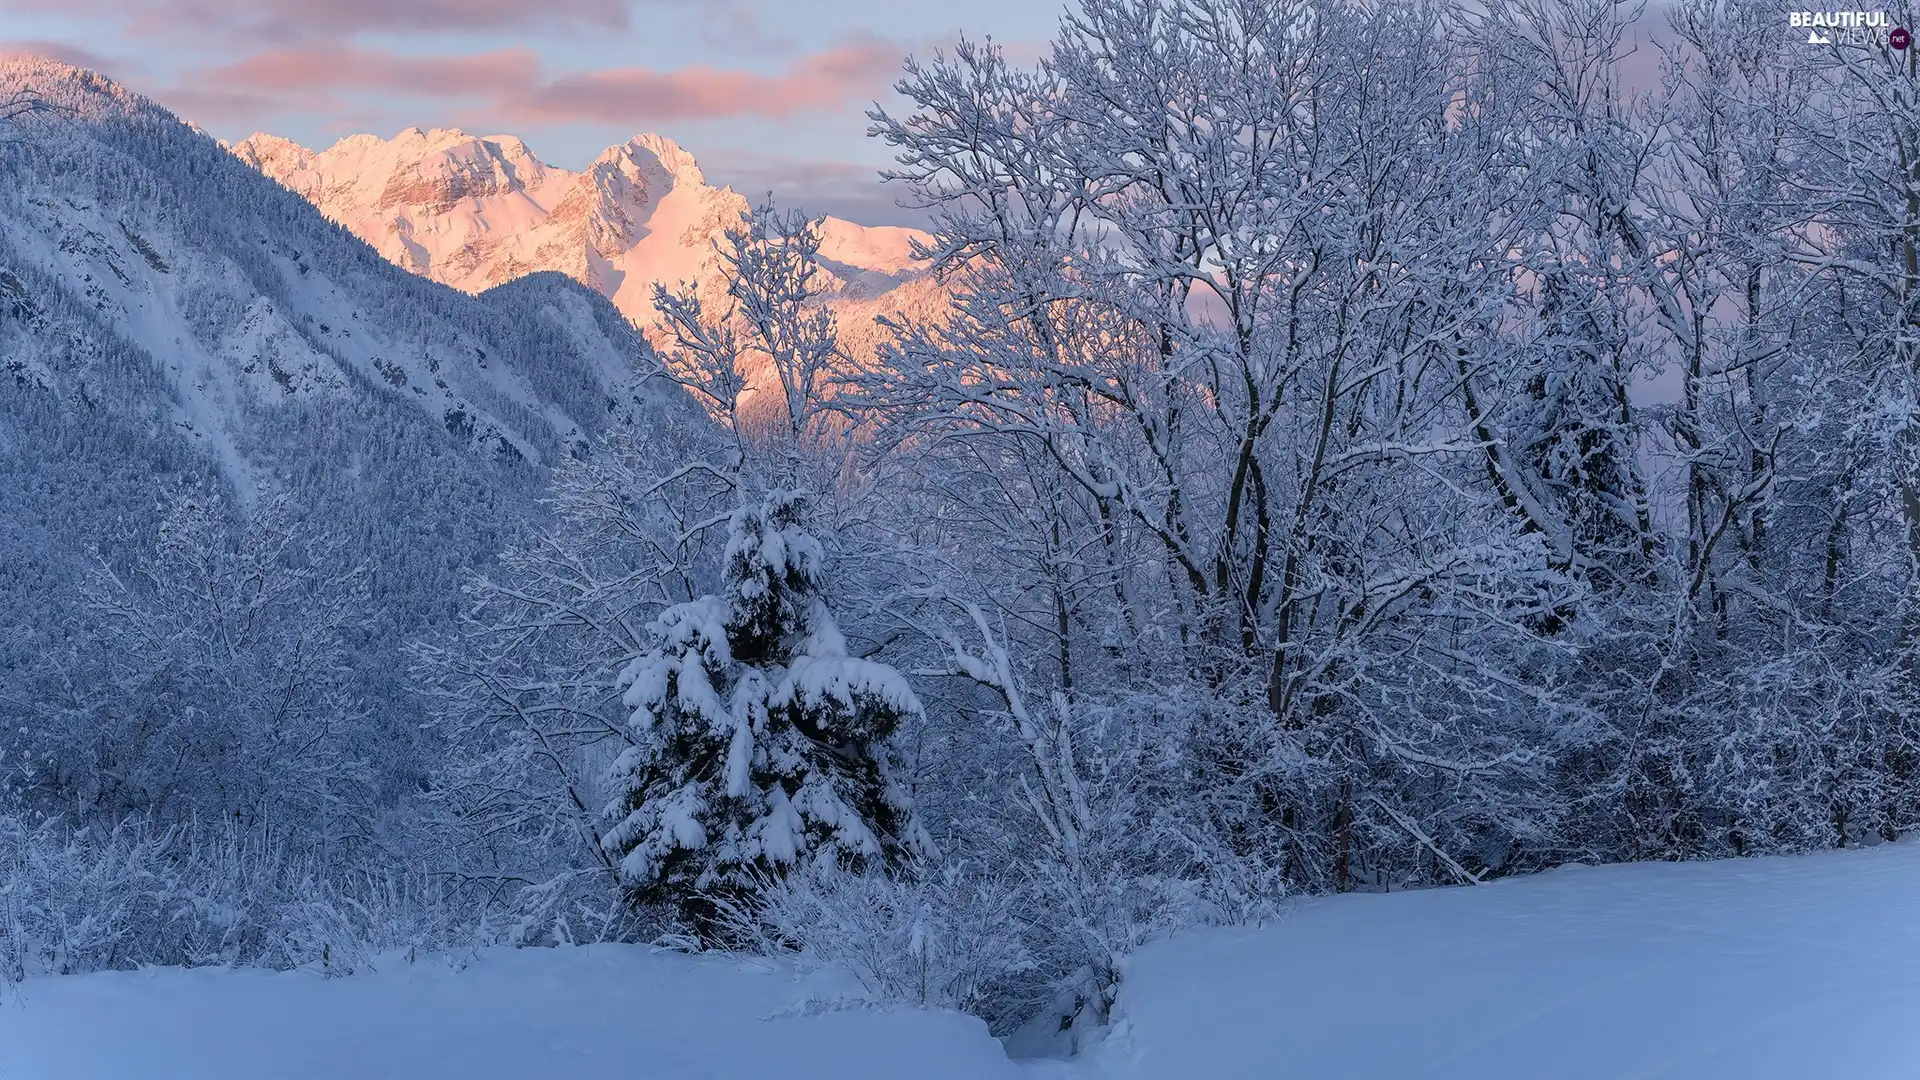 Mountains, winter, trees, viewes, Snowy, illuminated